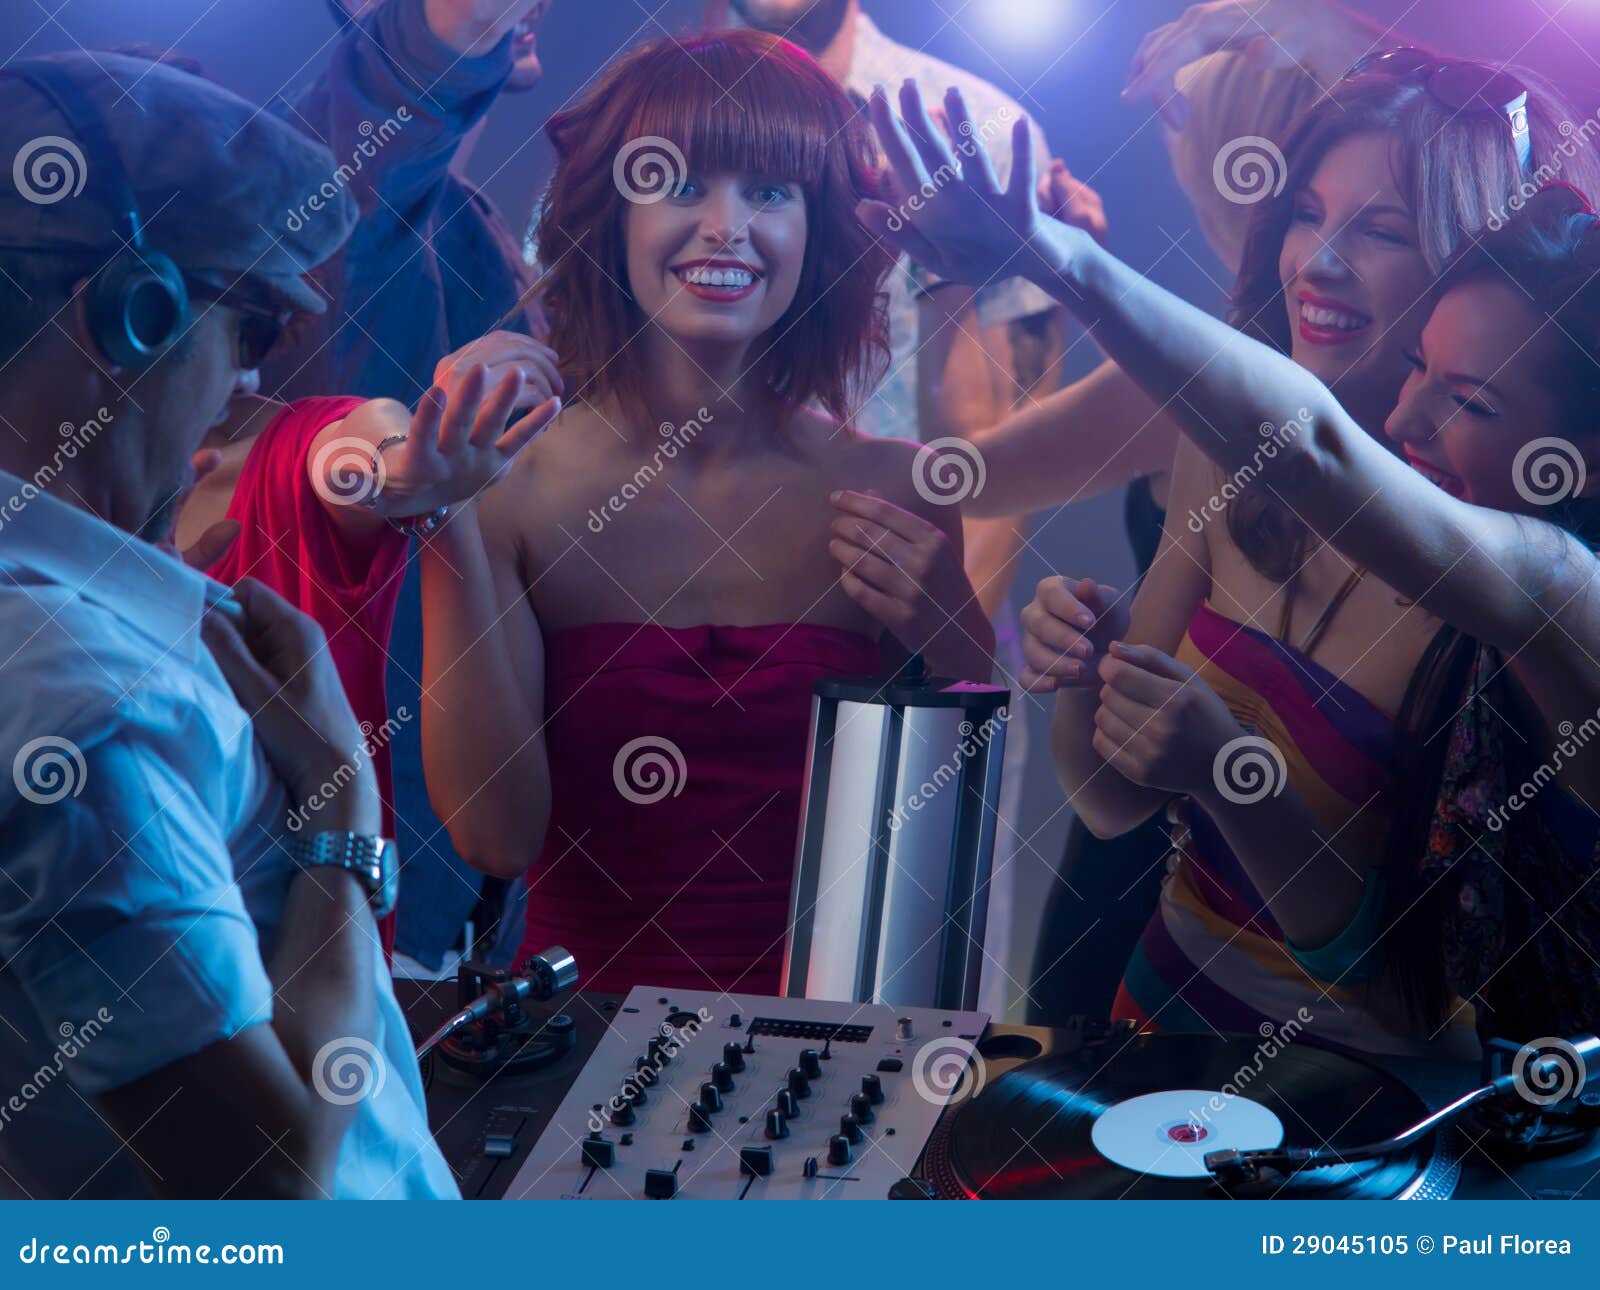 Young Attractive Girl Laughing at Party with Dj Stock Image - Image of ...